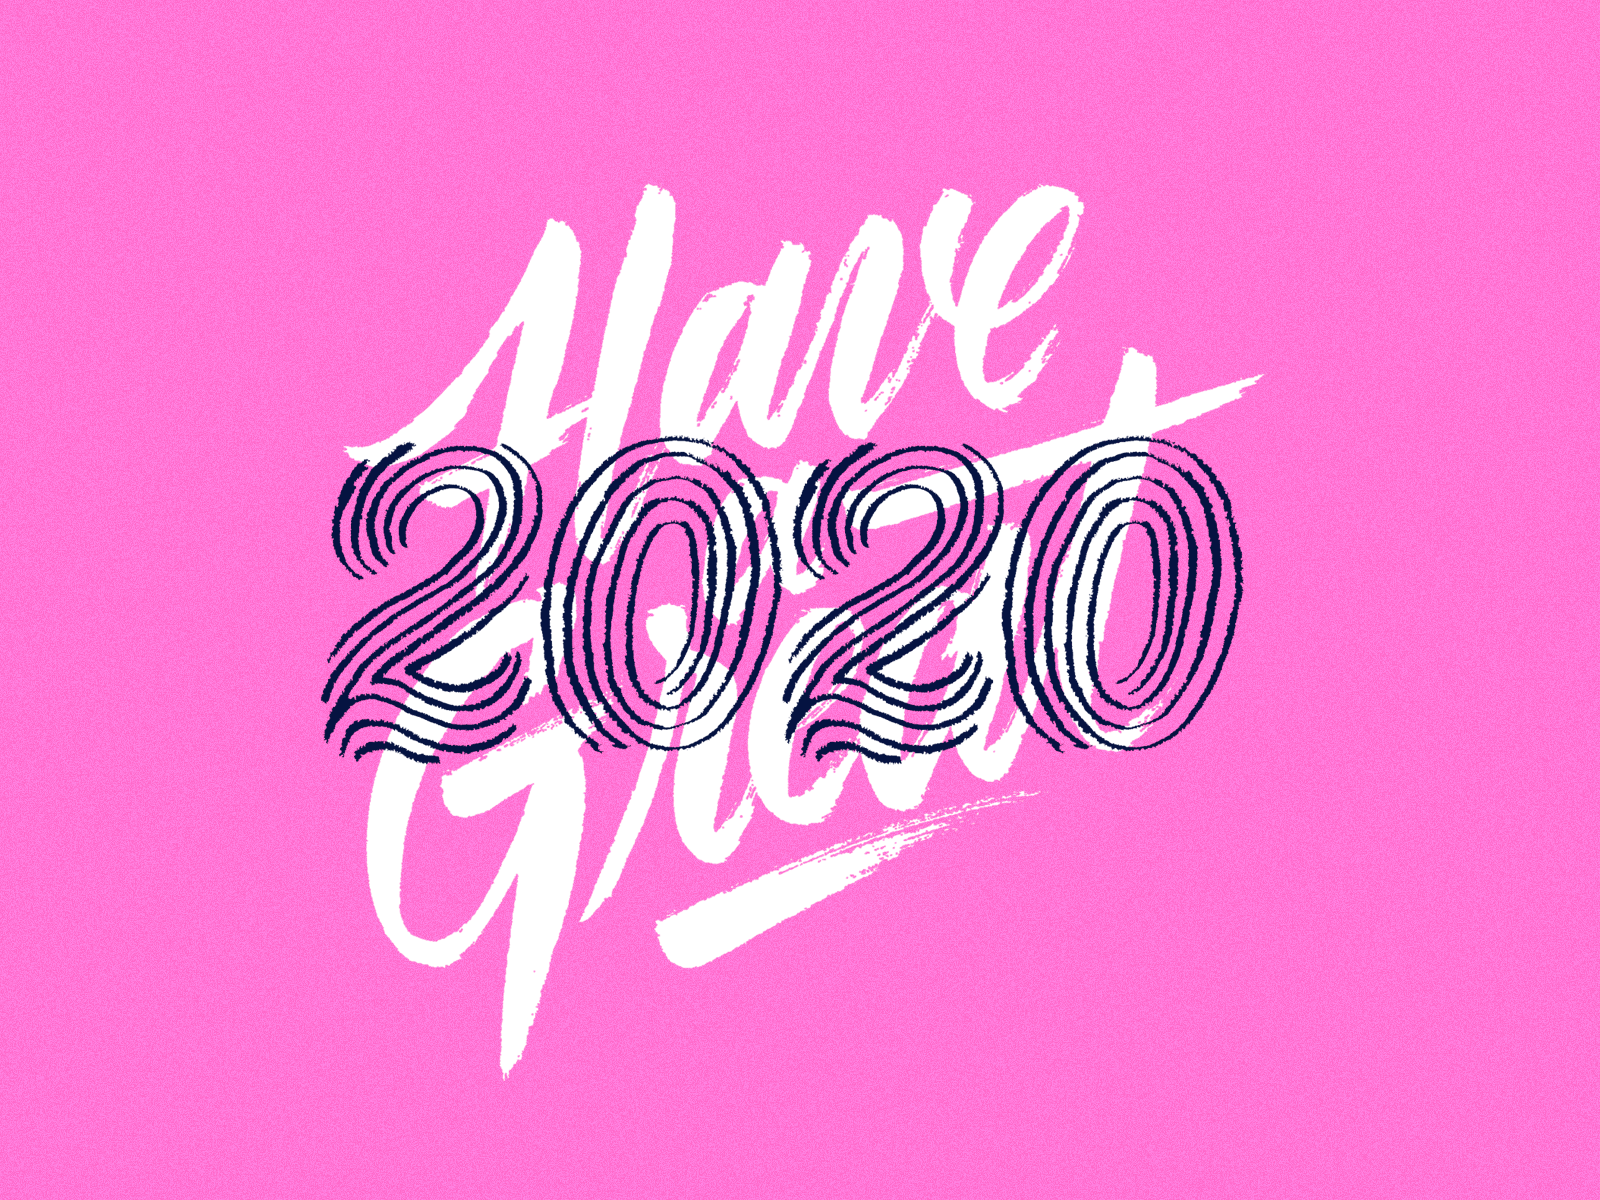 HAVE A GREAT 2020!!! caligrafia calligraphy graphicdesign hadstyle hugomoura identity illustration lettering penmanship scriptease signpainting skillsmadeofdeouro tagging type typemystyle typography visualidentity xesta xestaone xestastudio